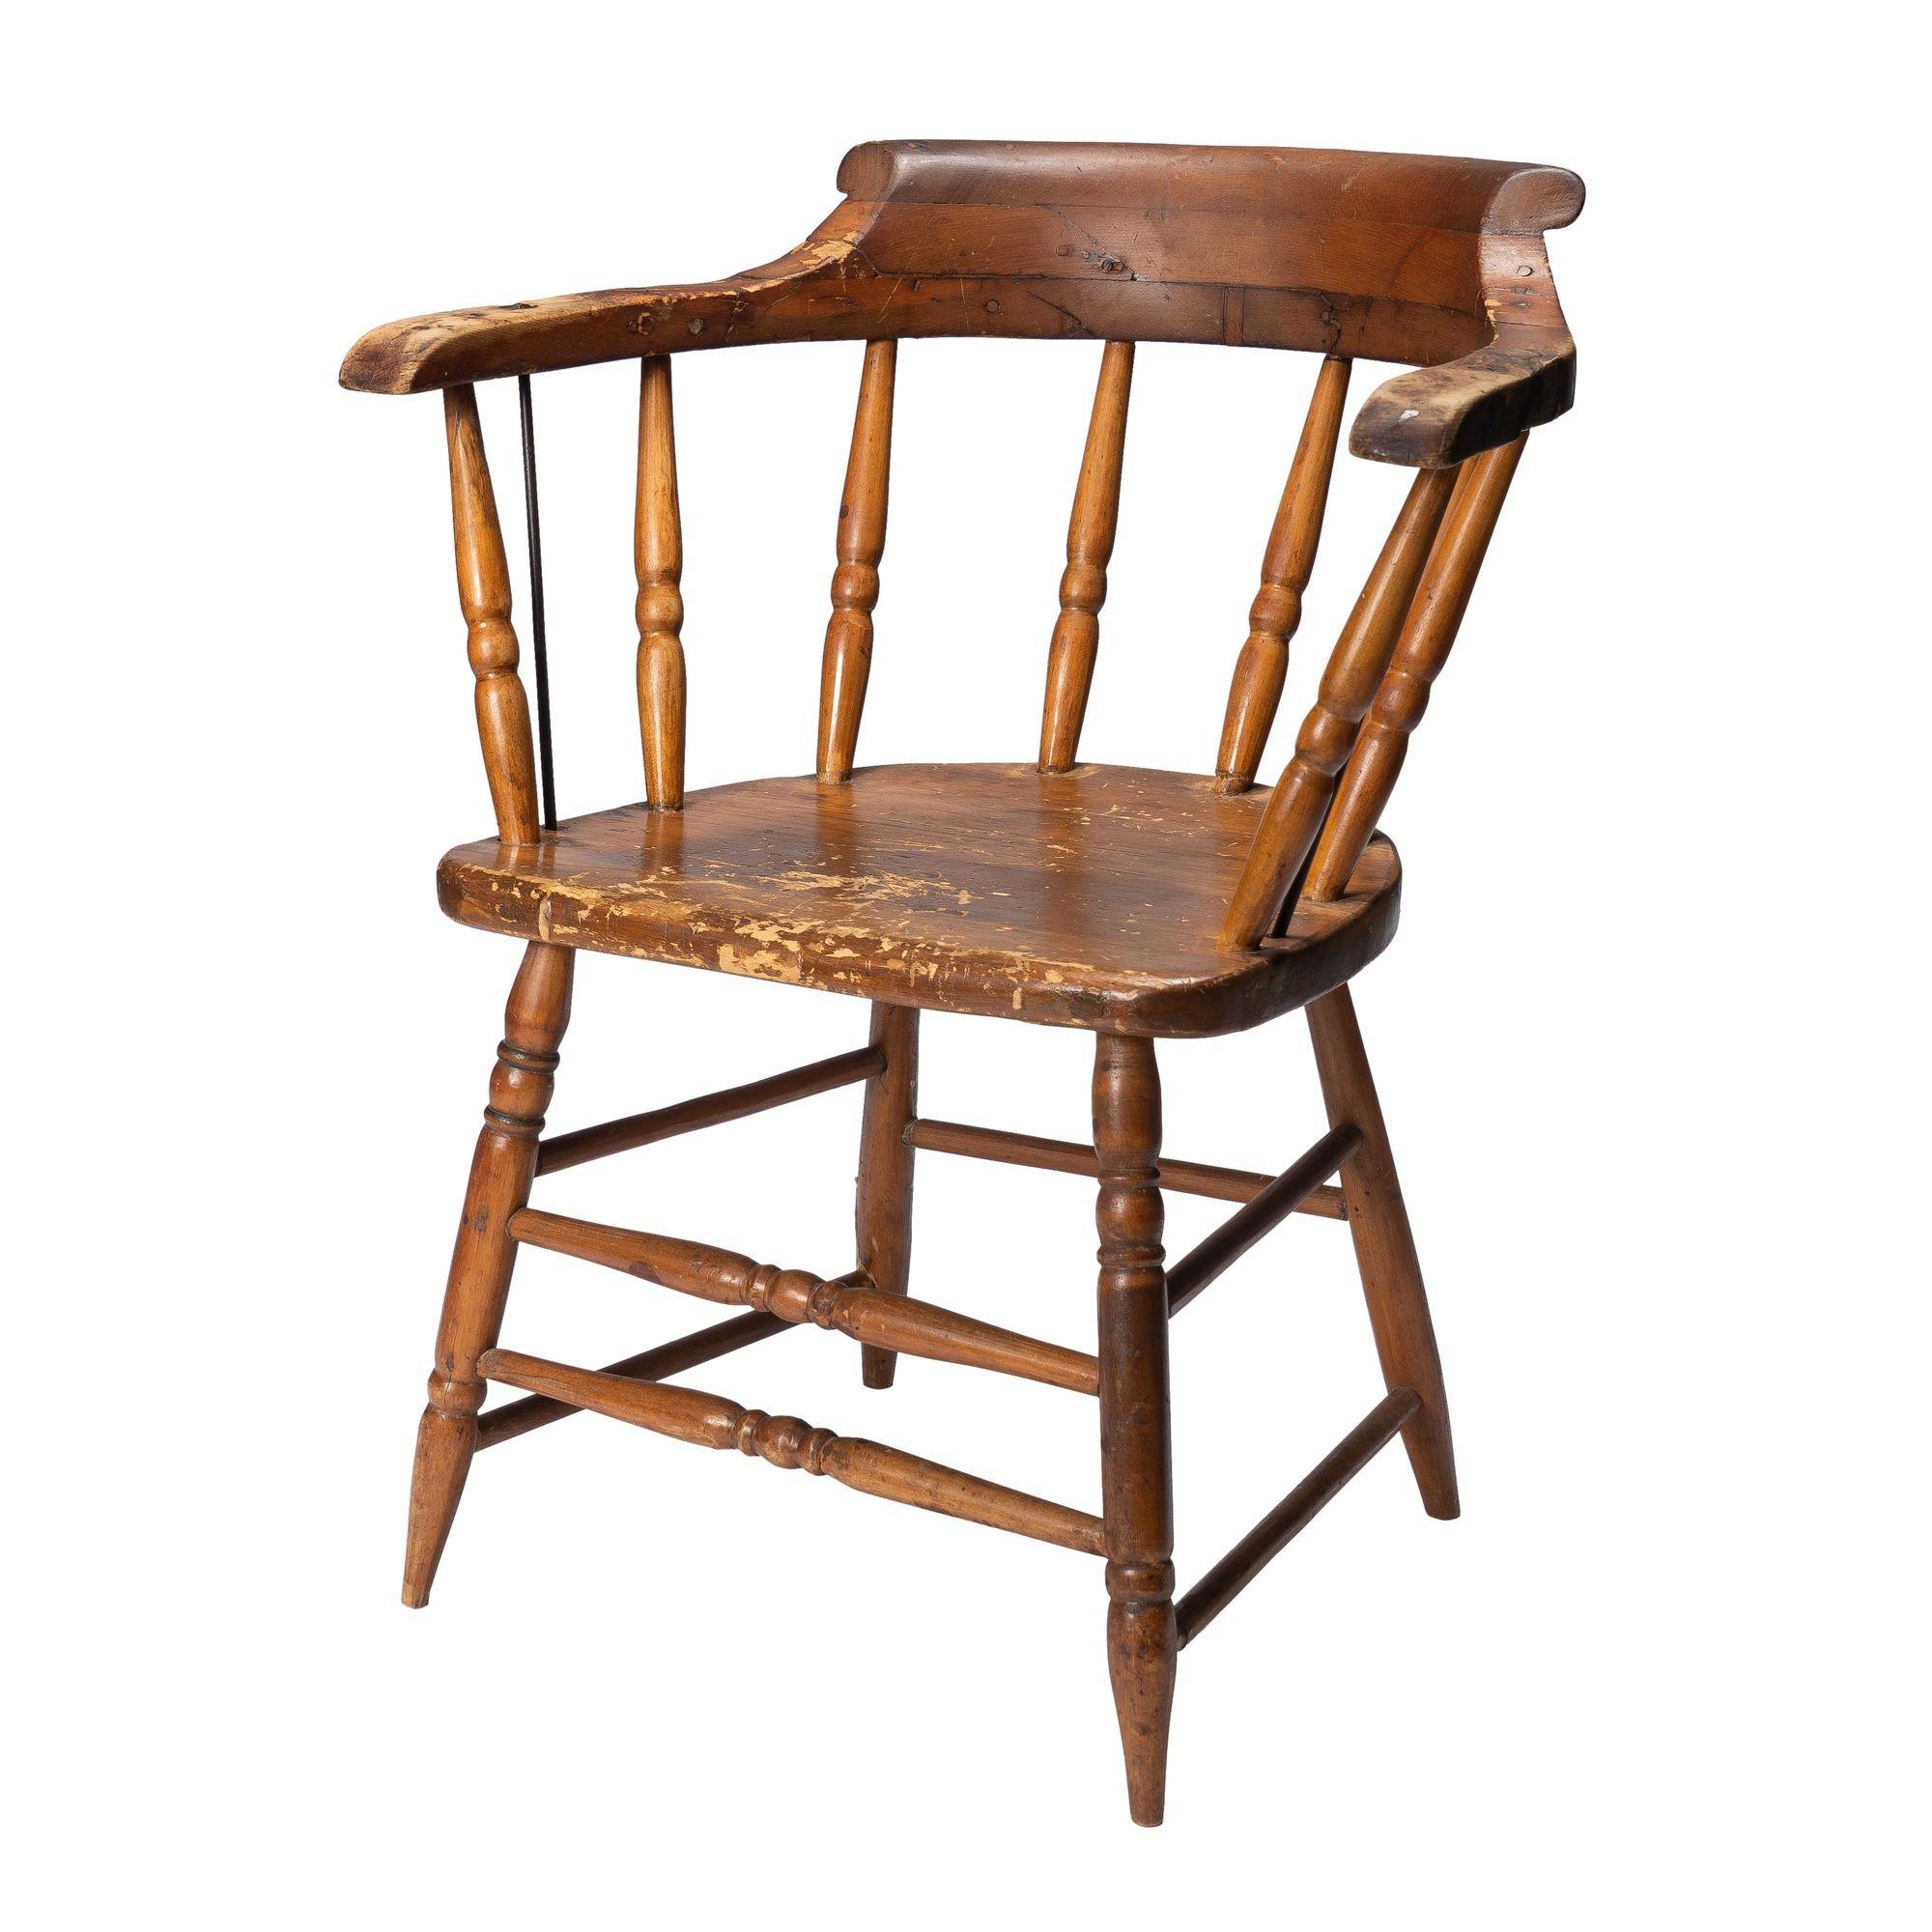 American Windsor firehouse chair with a continuous arm yolk back. The crest rail has an applied scroll raised above the arms, and the entire yoke is supported by eight turned spindles morticed into the plank seat. The turned legs are doweled into